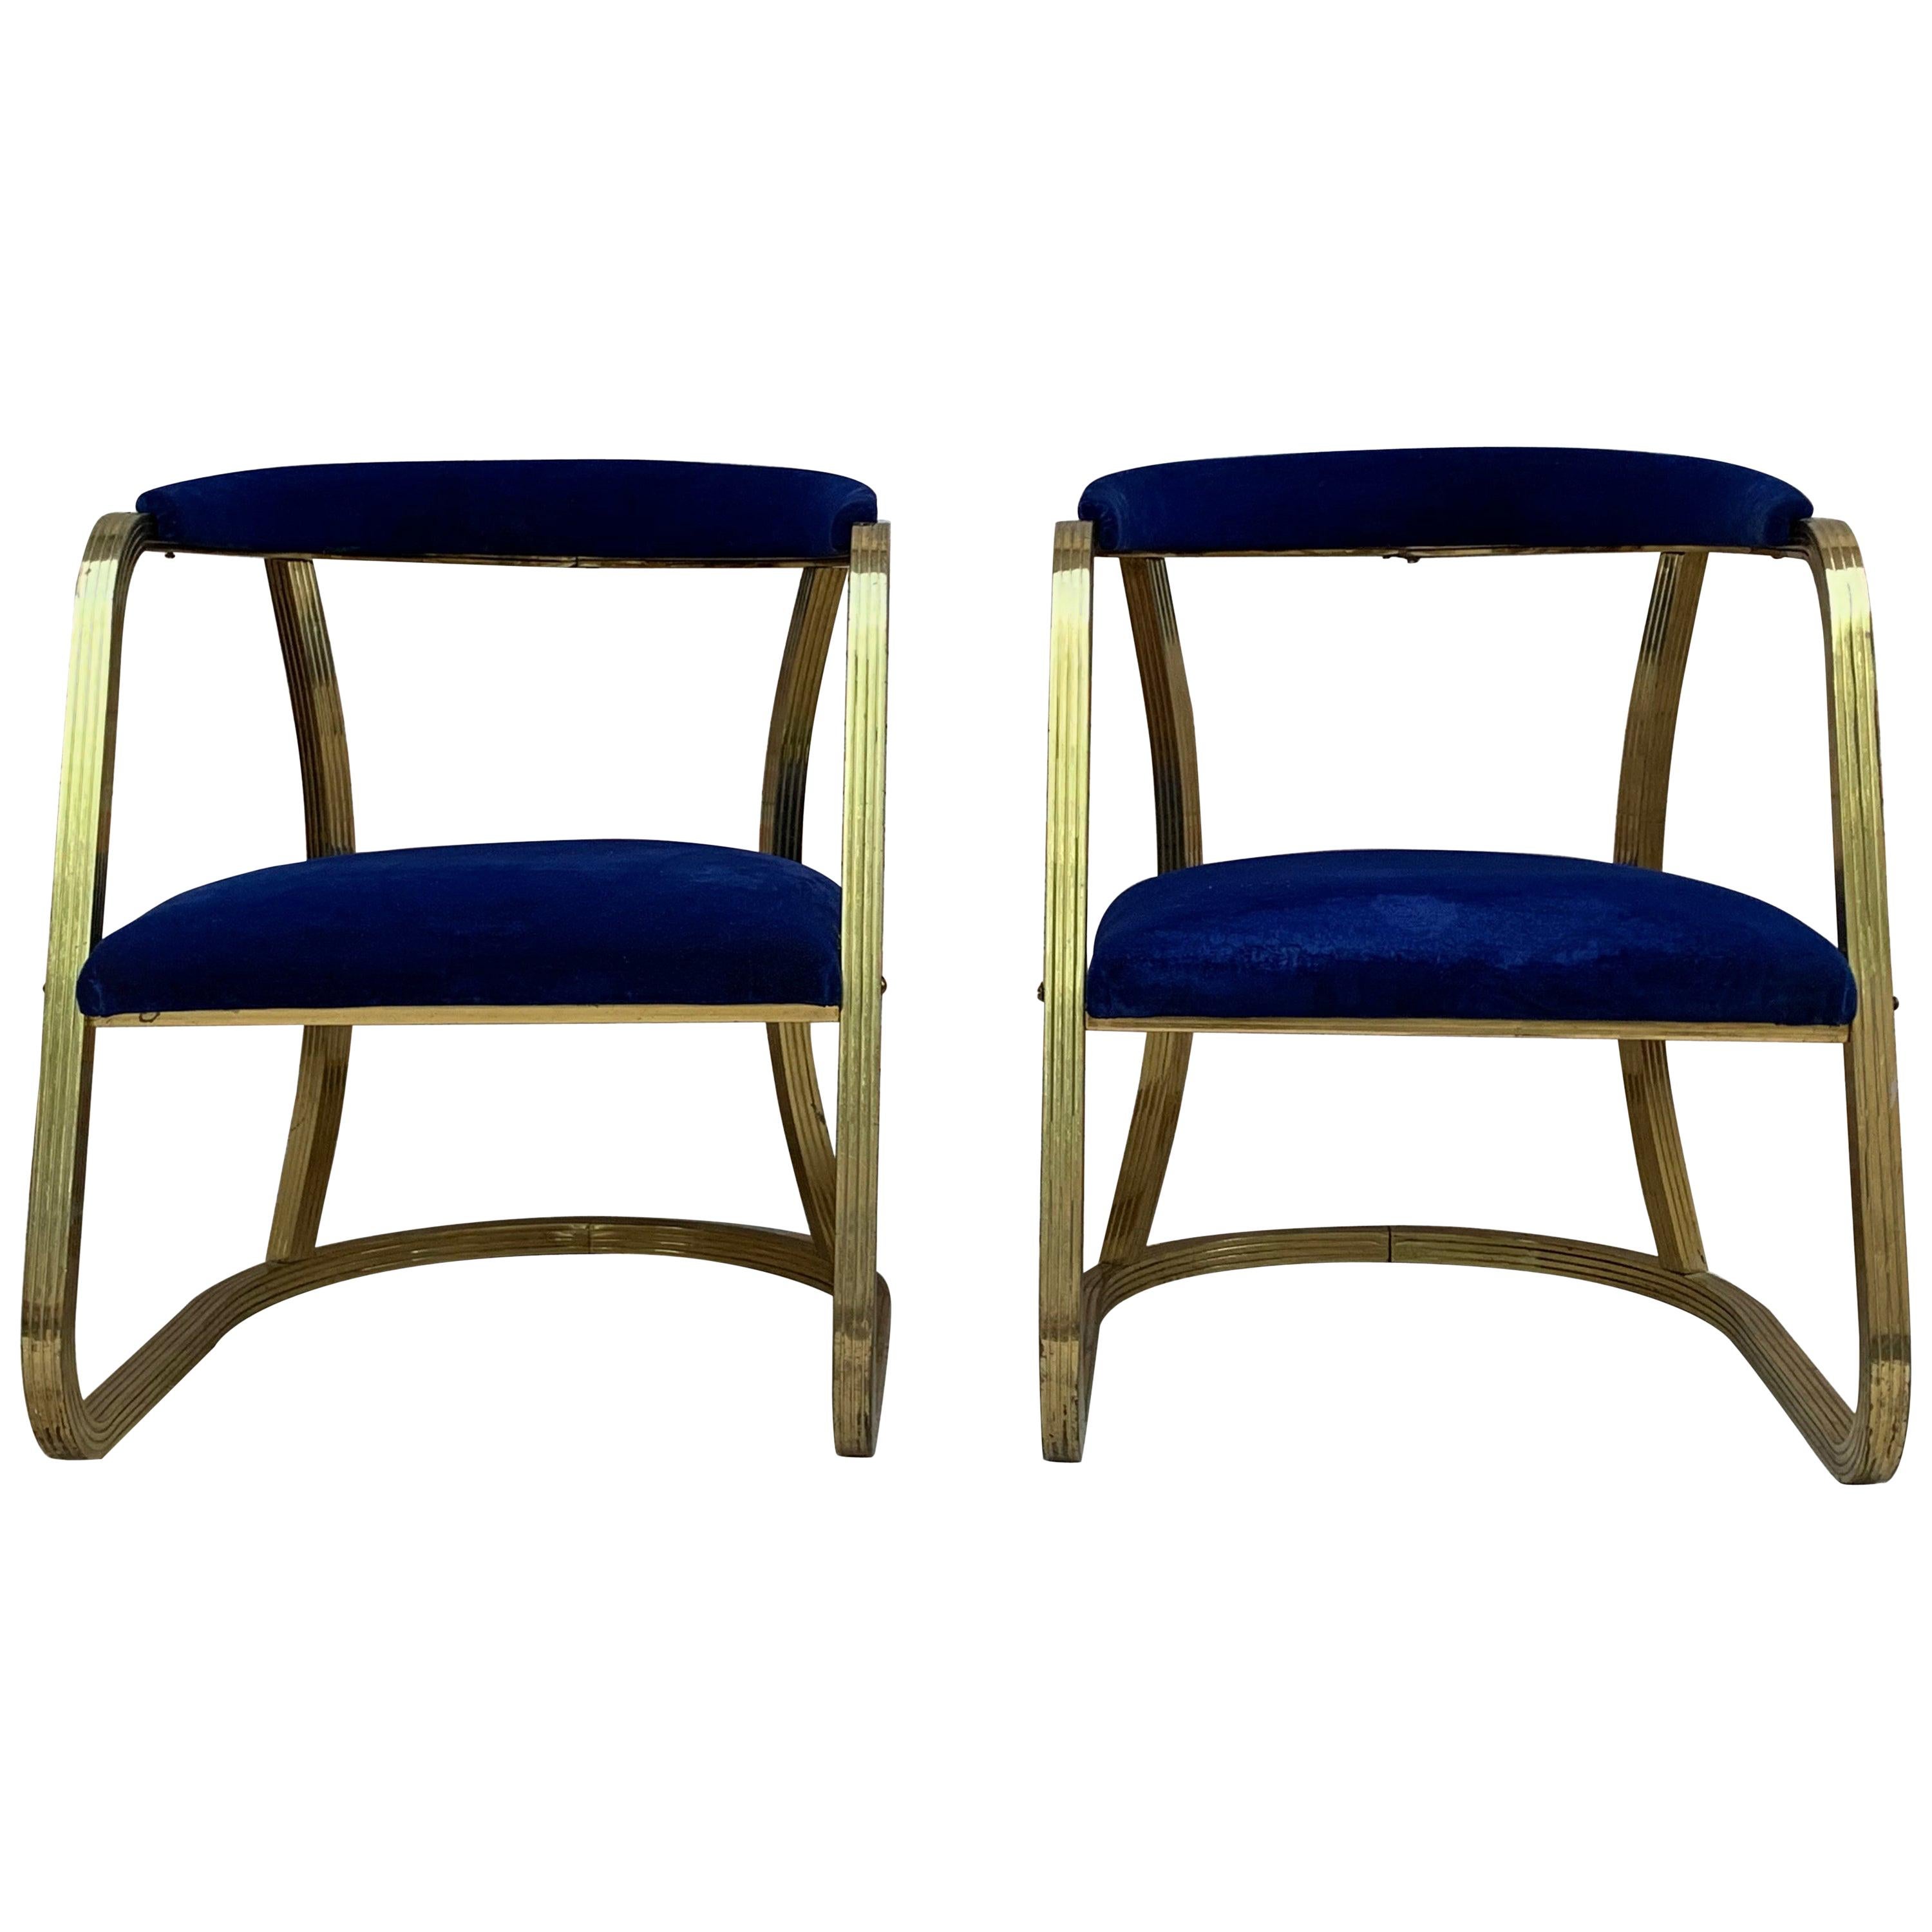 French Pair of Midcentury Gold Brass Chairs with Blue Velvet Upholstery